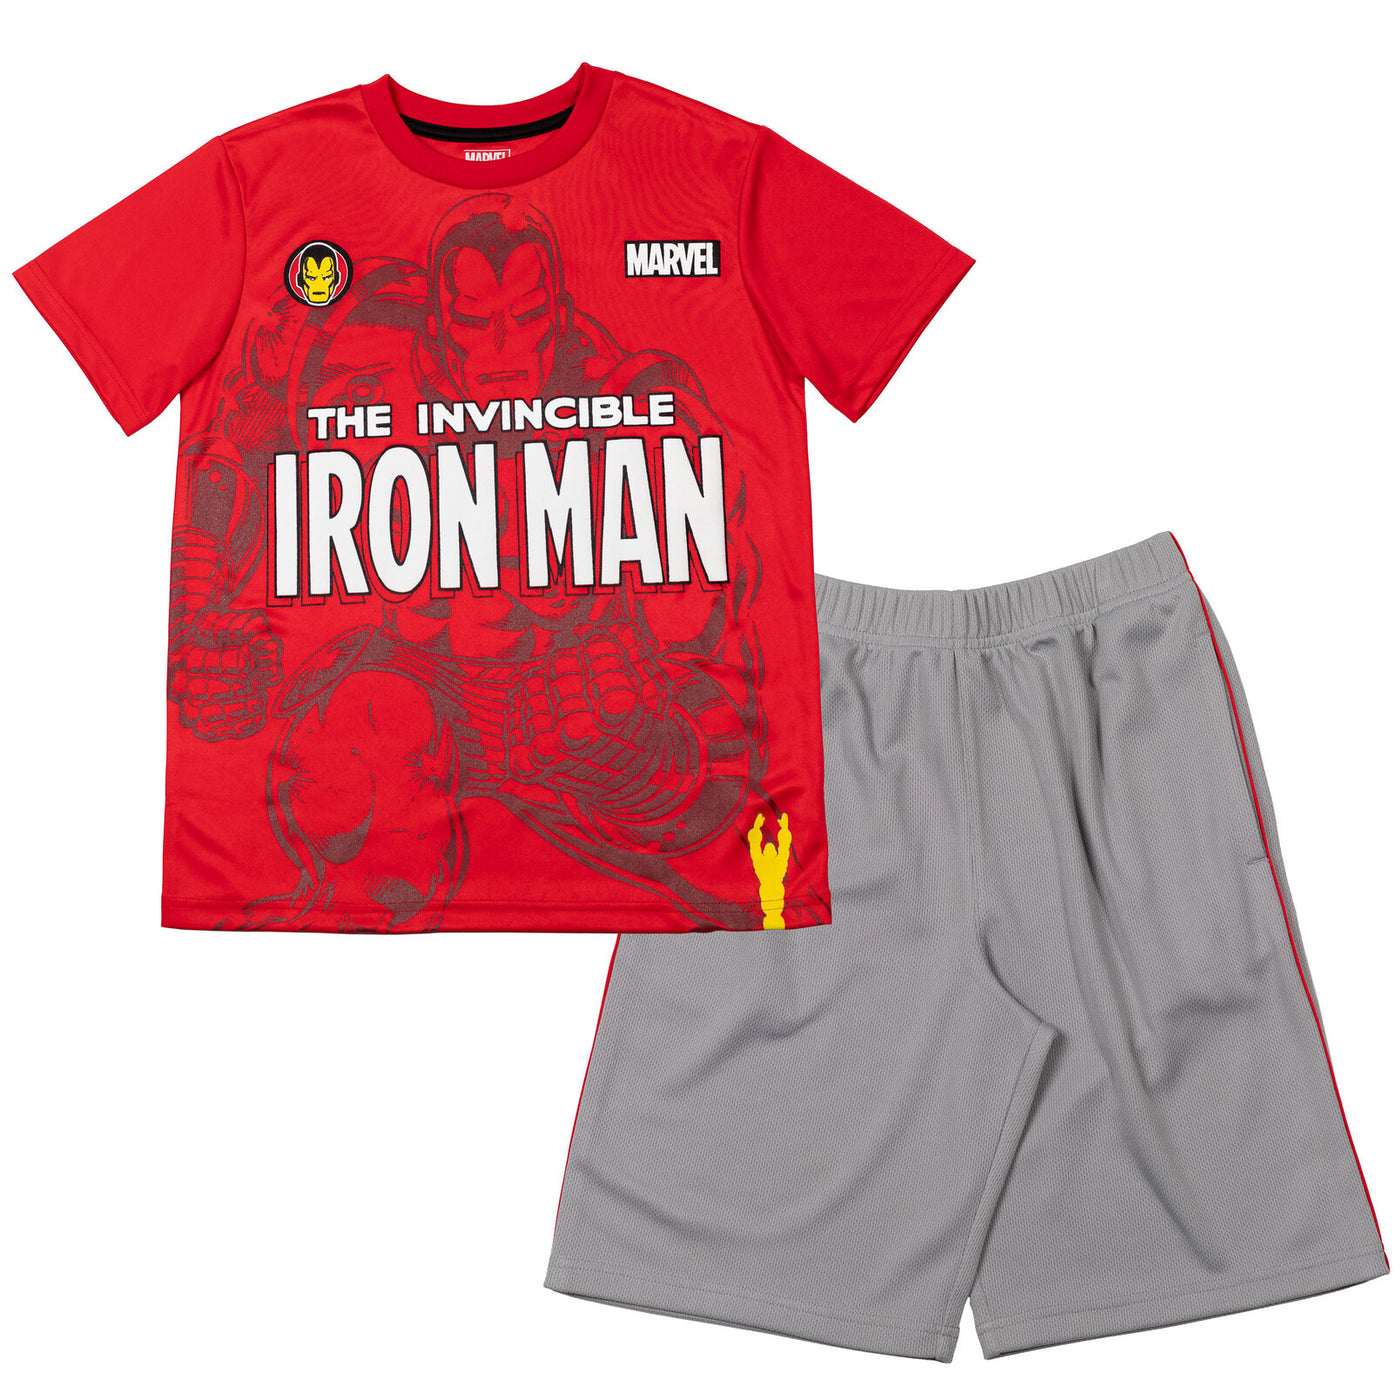 Marvel Avengers Iron Man T-Shirt and Shorts Outfit Set